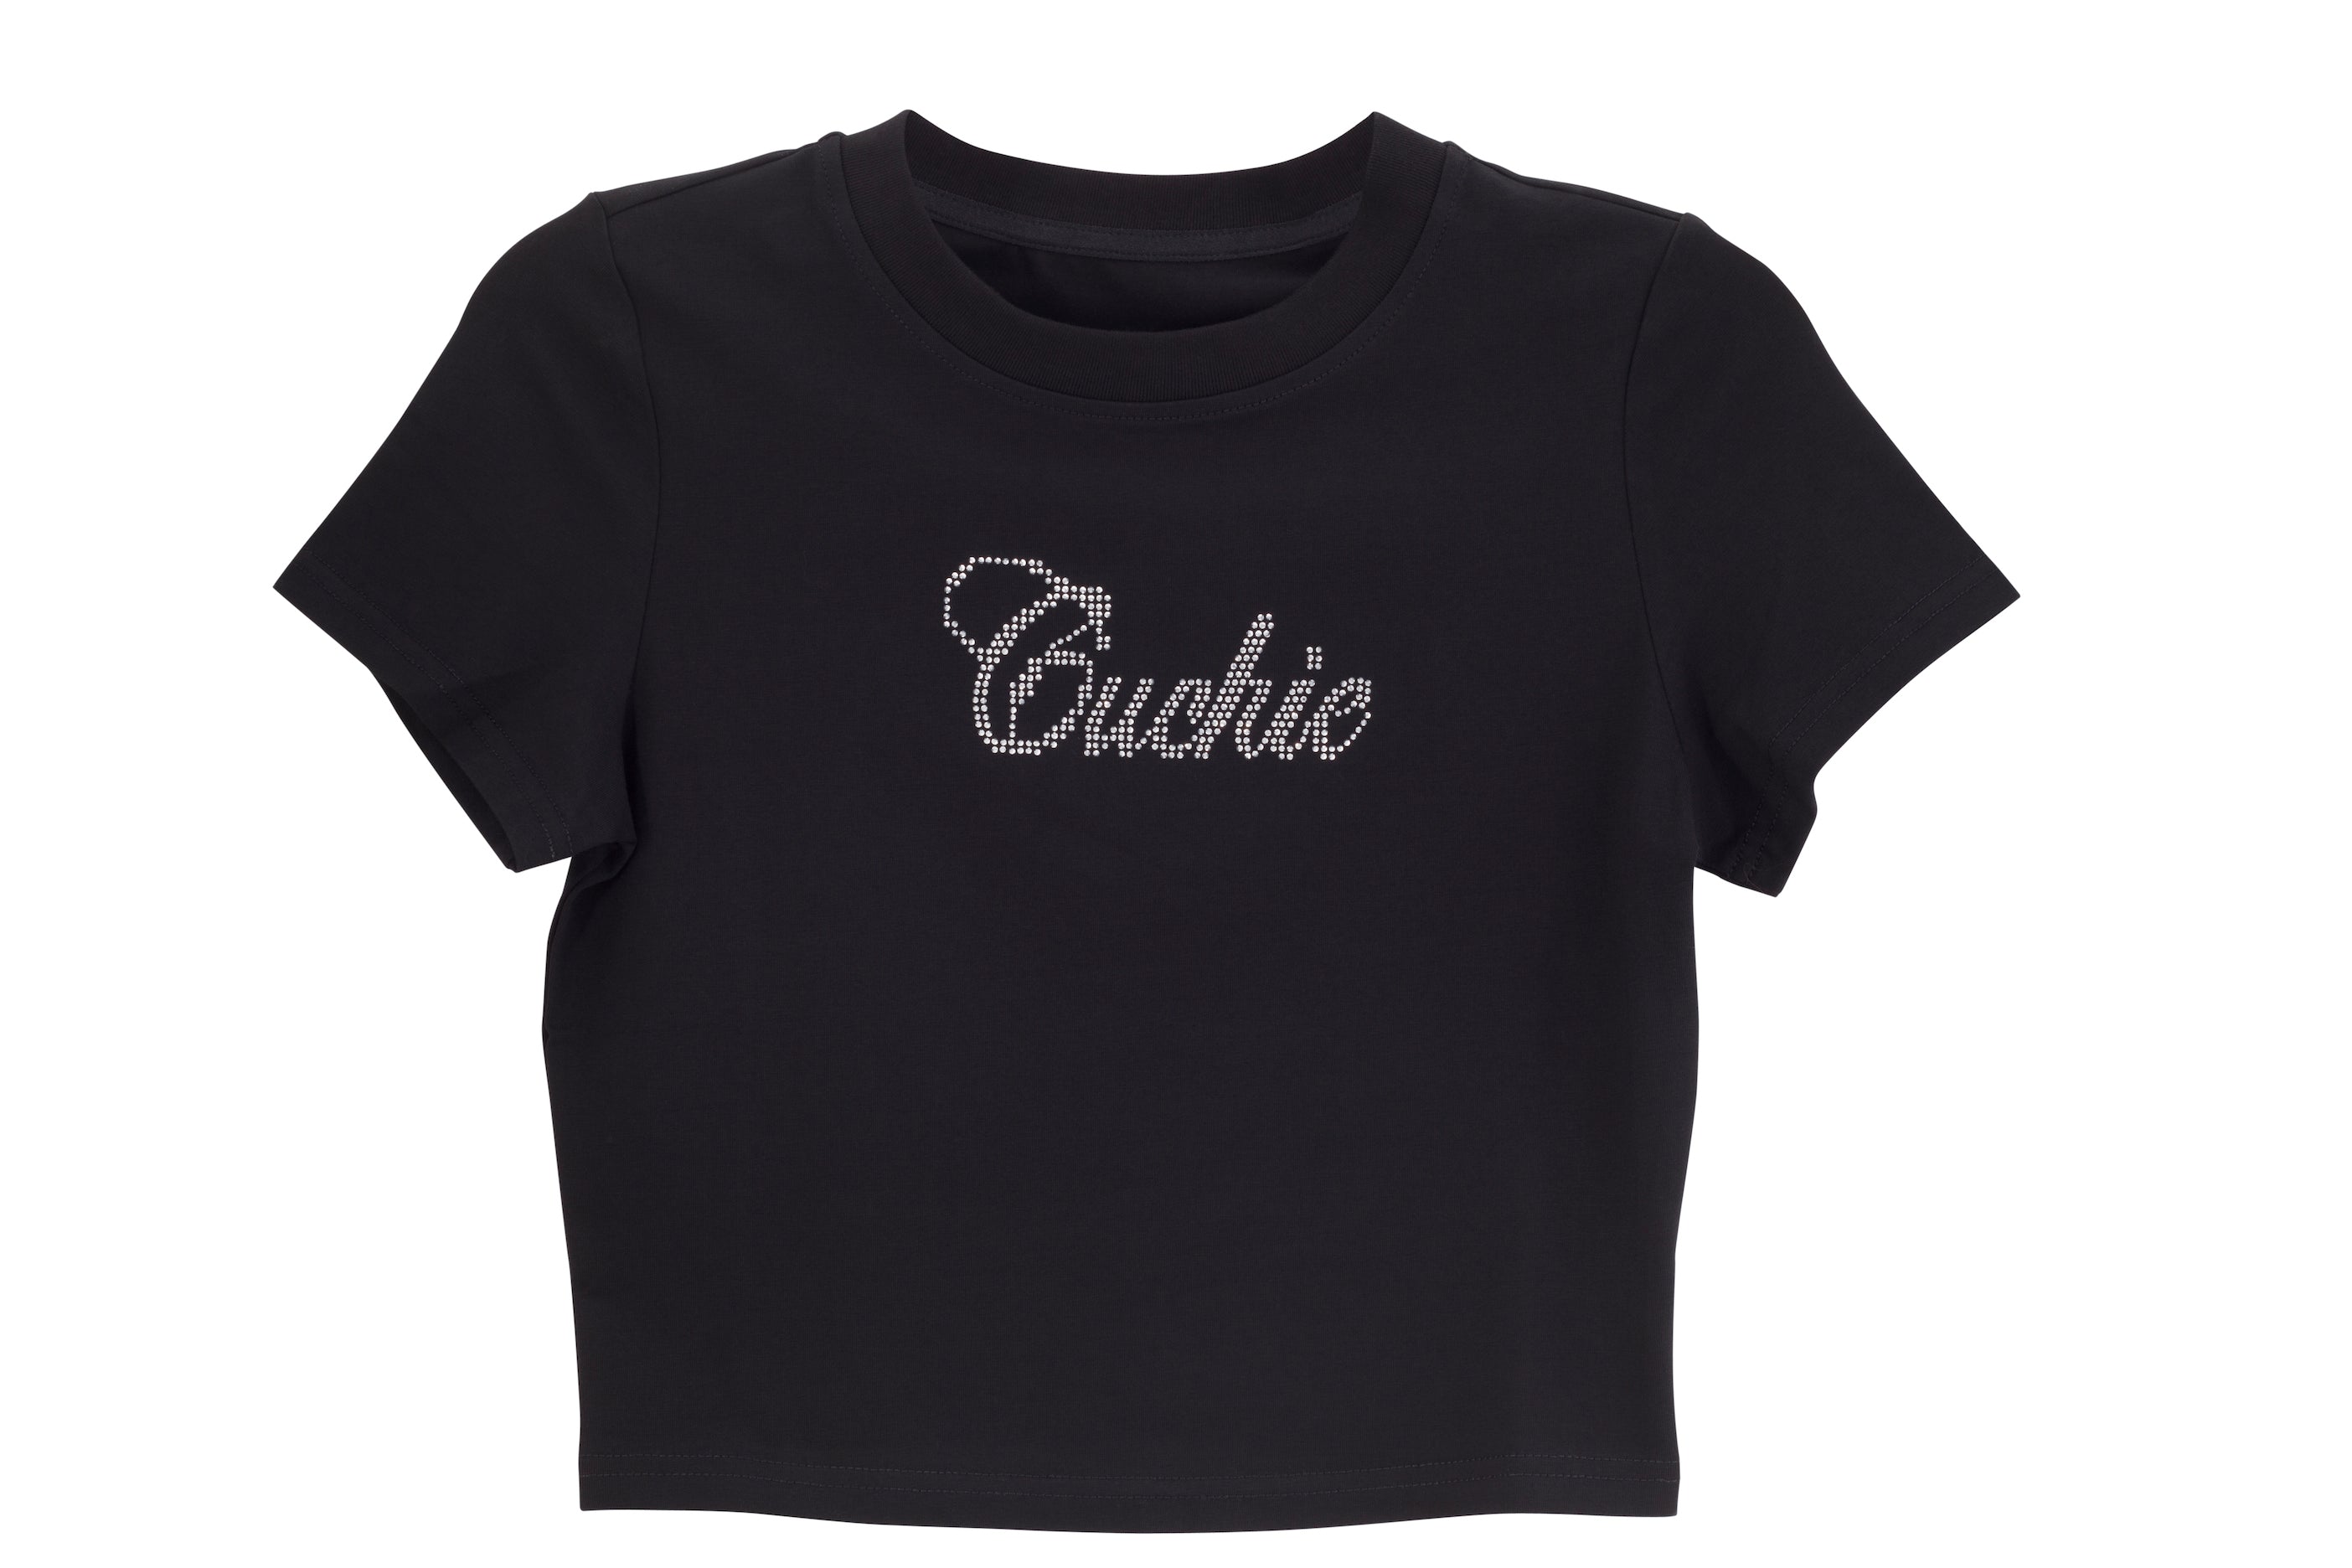 Black cropped t-shirt with "Cuchie" text in rhinestones